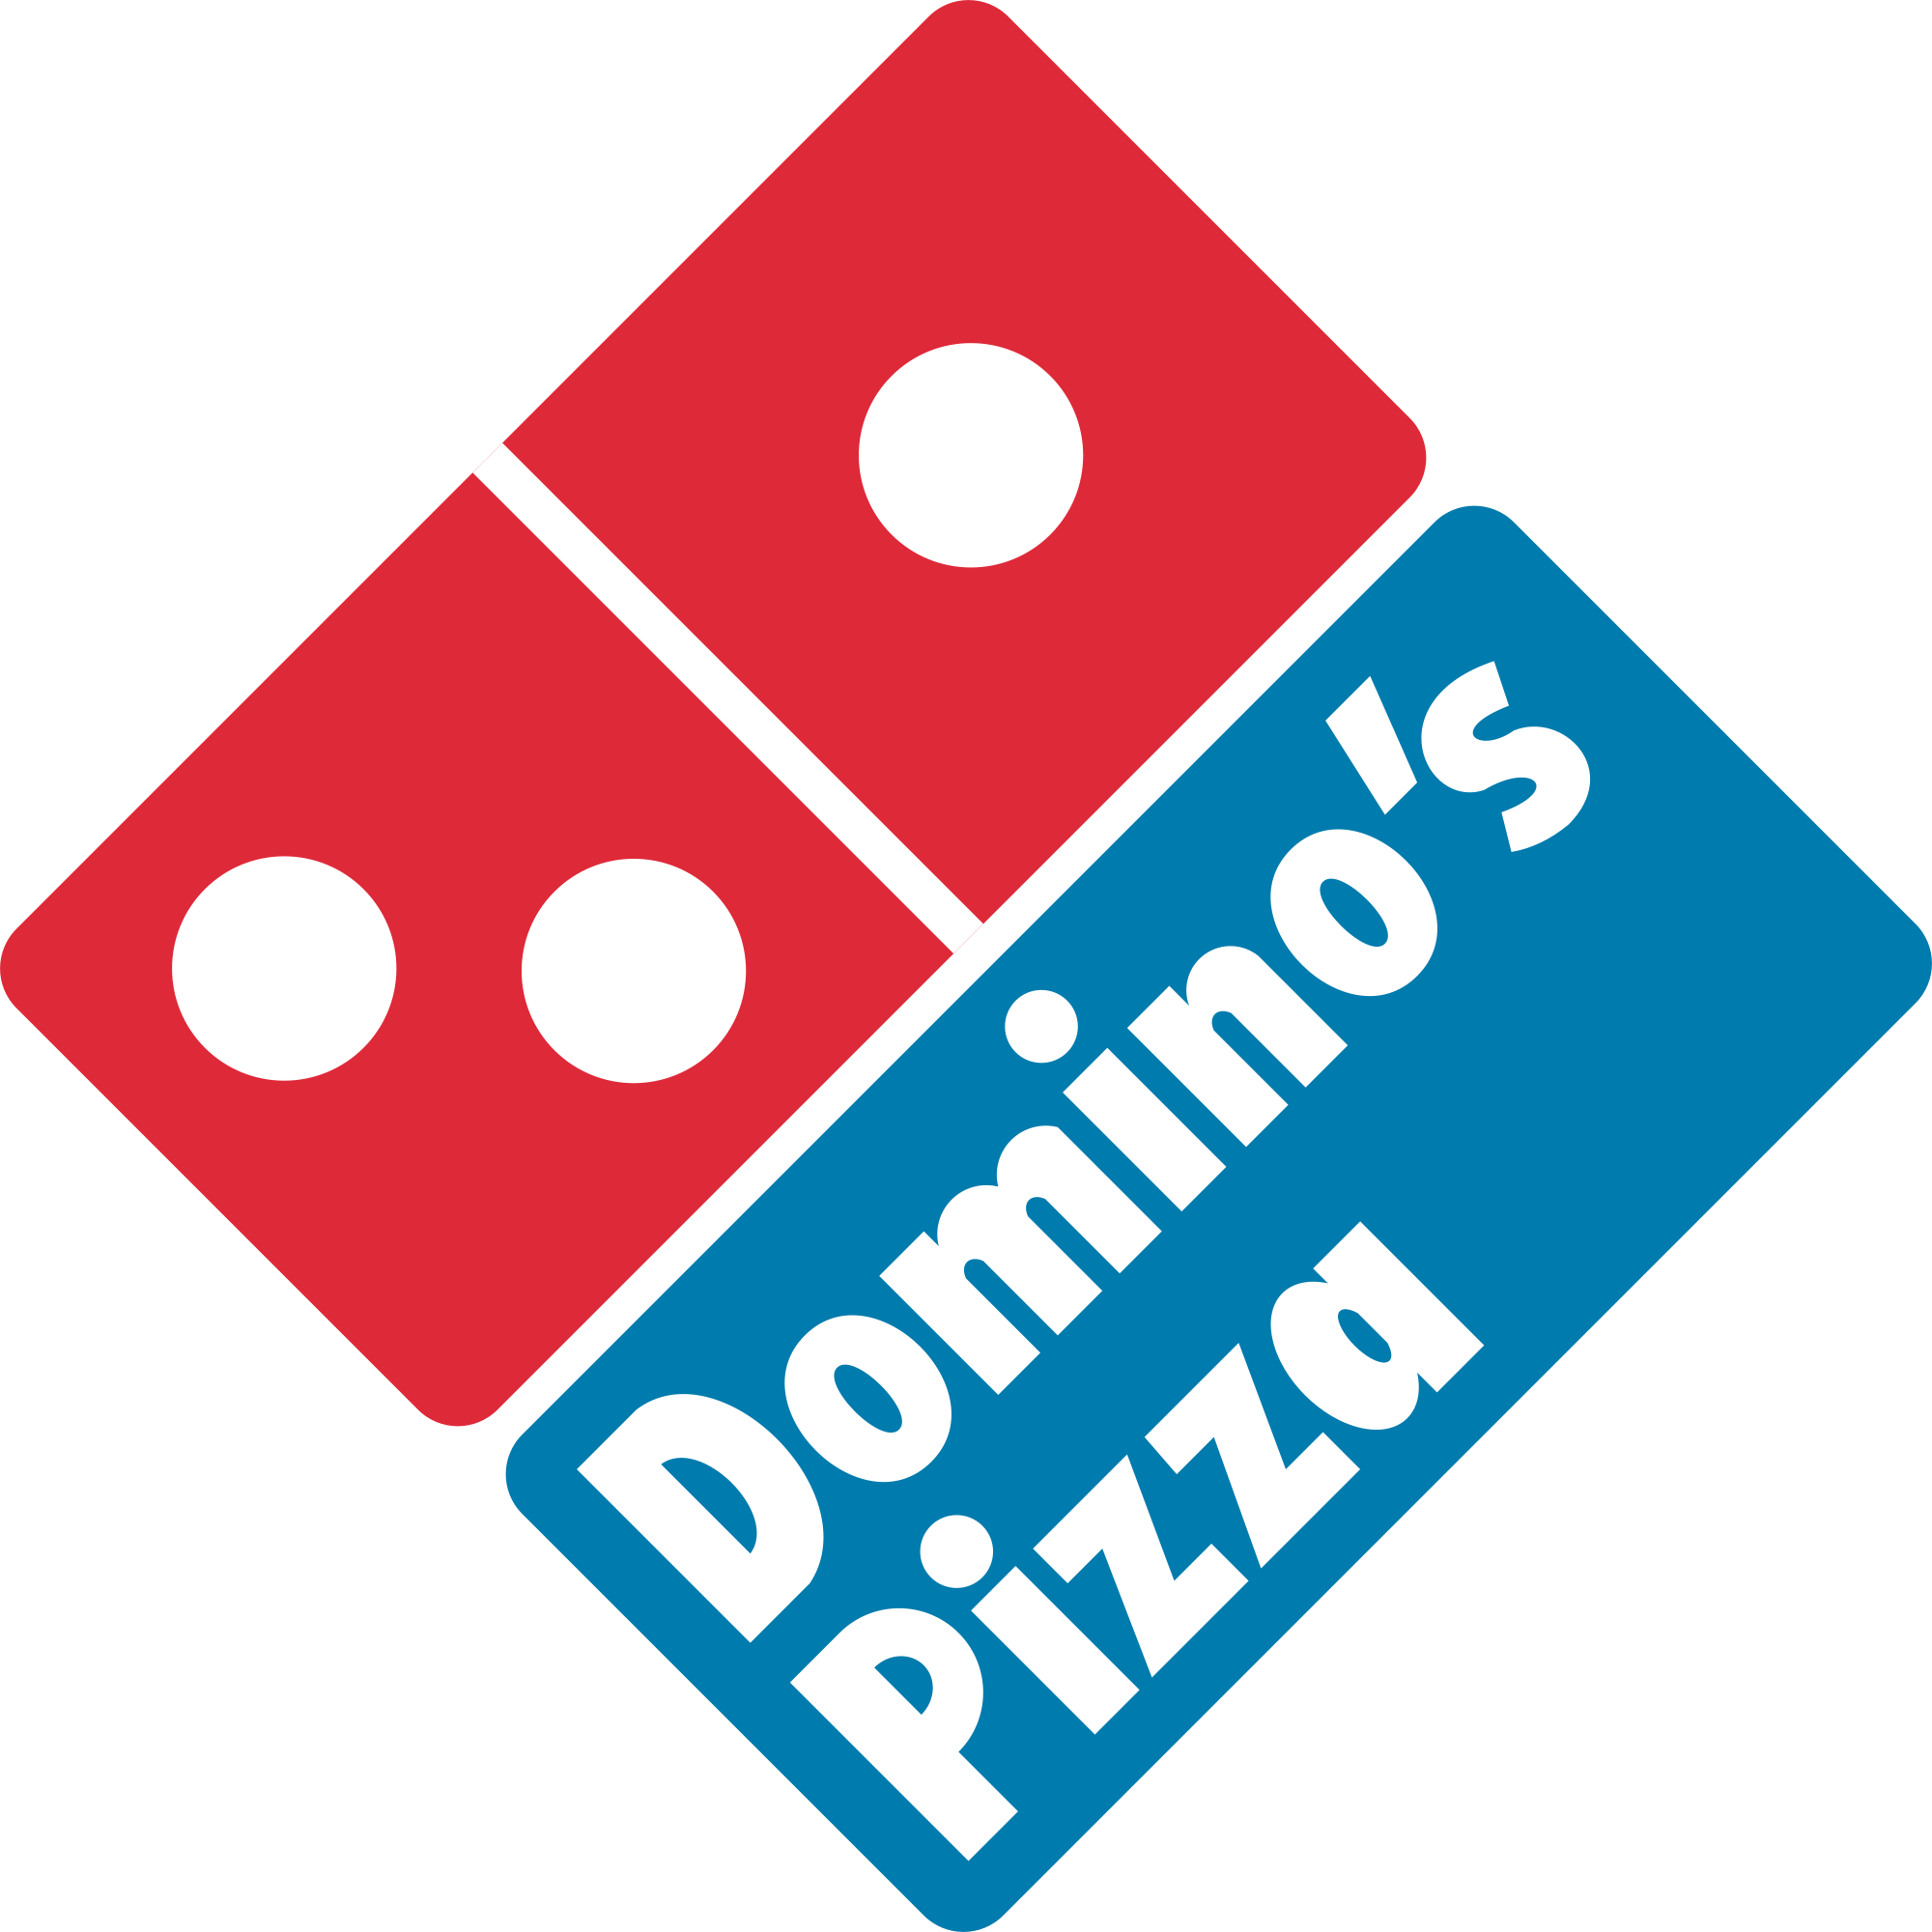 Week Adjourned: 3.27.15 - Dominos Pizza, Wen Haircare, AIG domino's pizza menu list